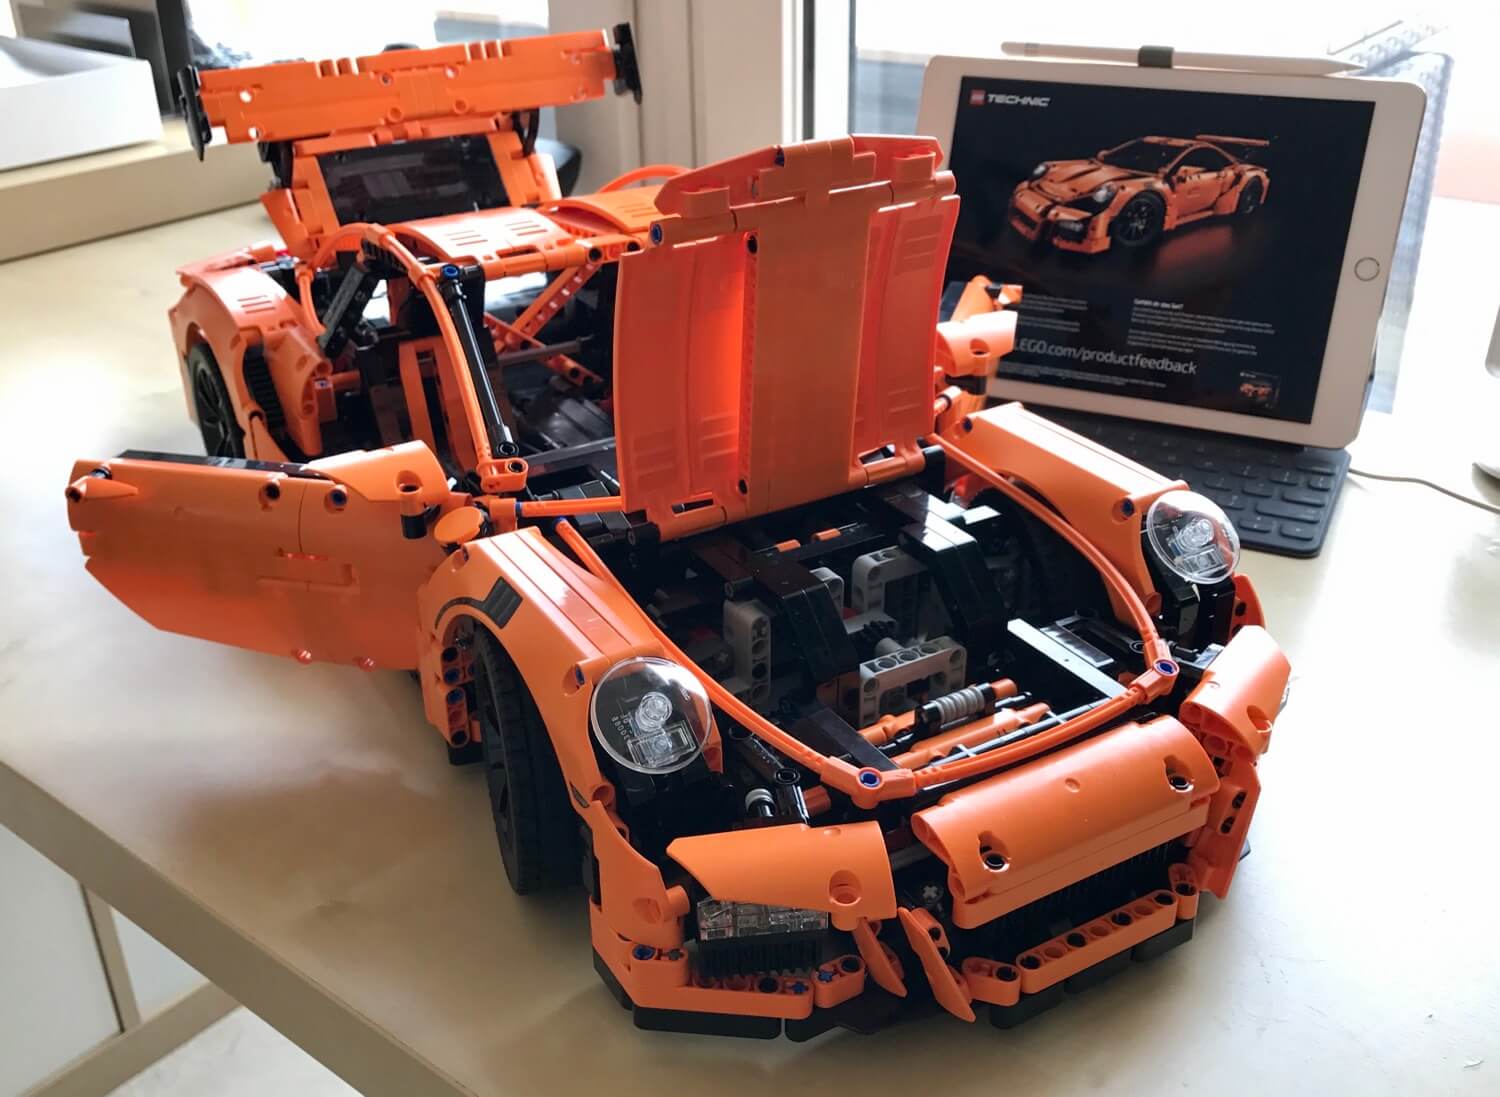 Porsche 911 GT3 RS - why building Lego sets is so much fun! 7